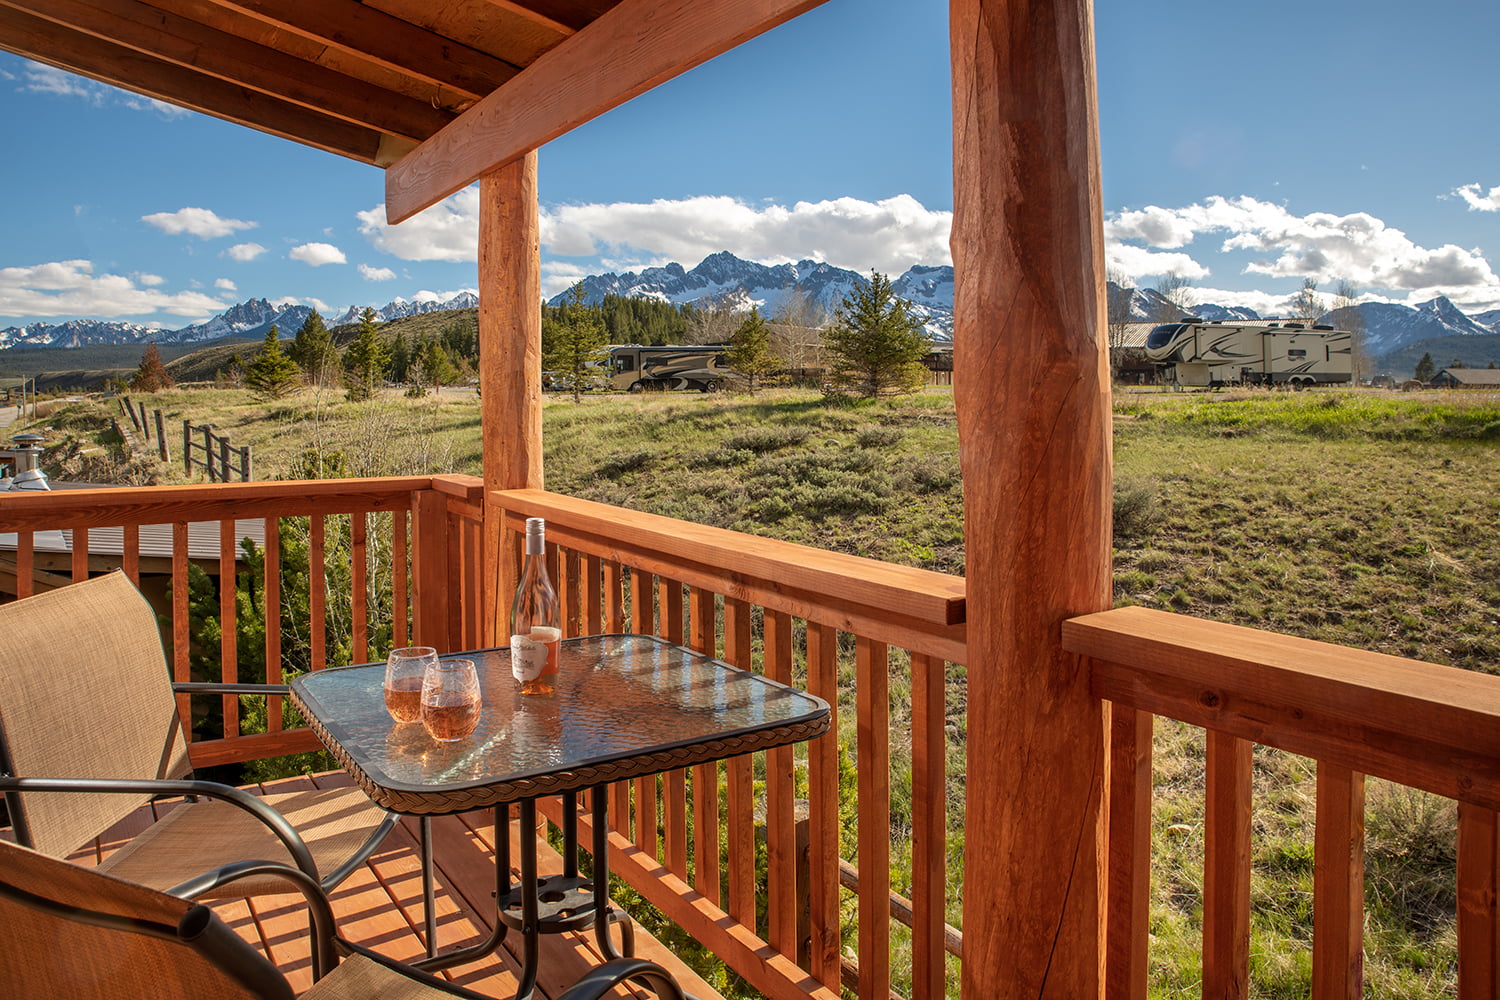 Sawtooth Lodge (#21 and #22 are Pet Friendly)